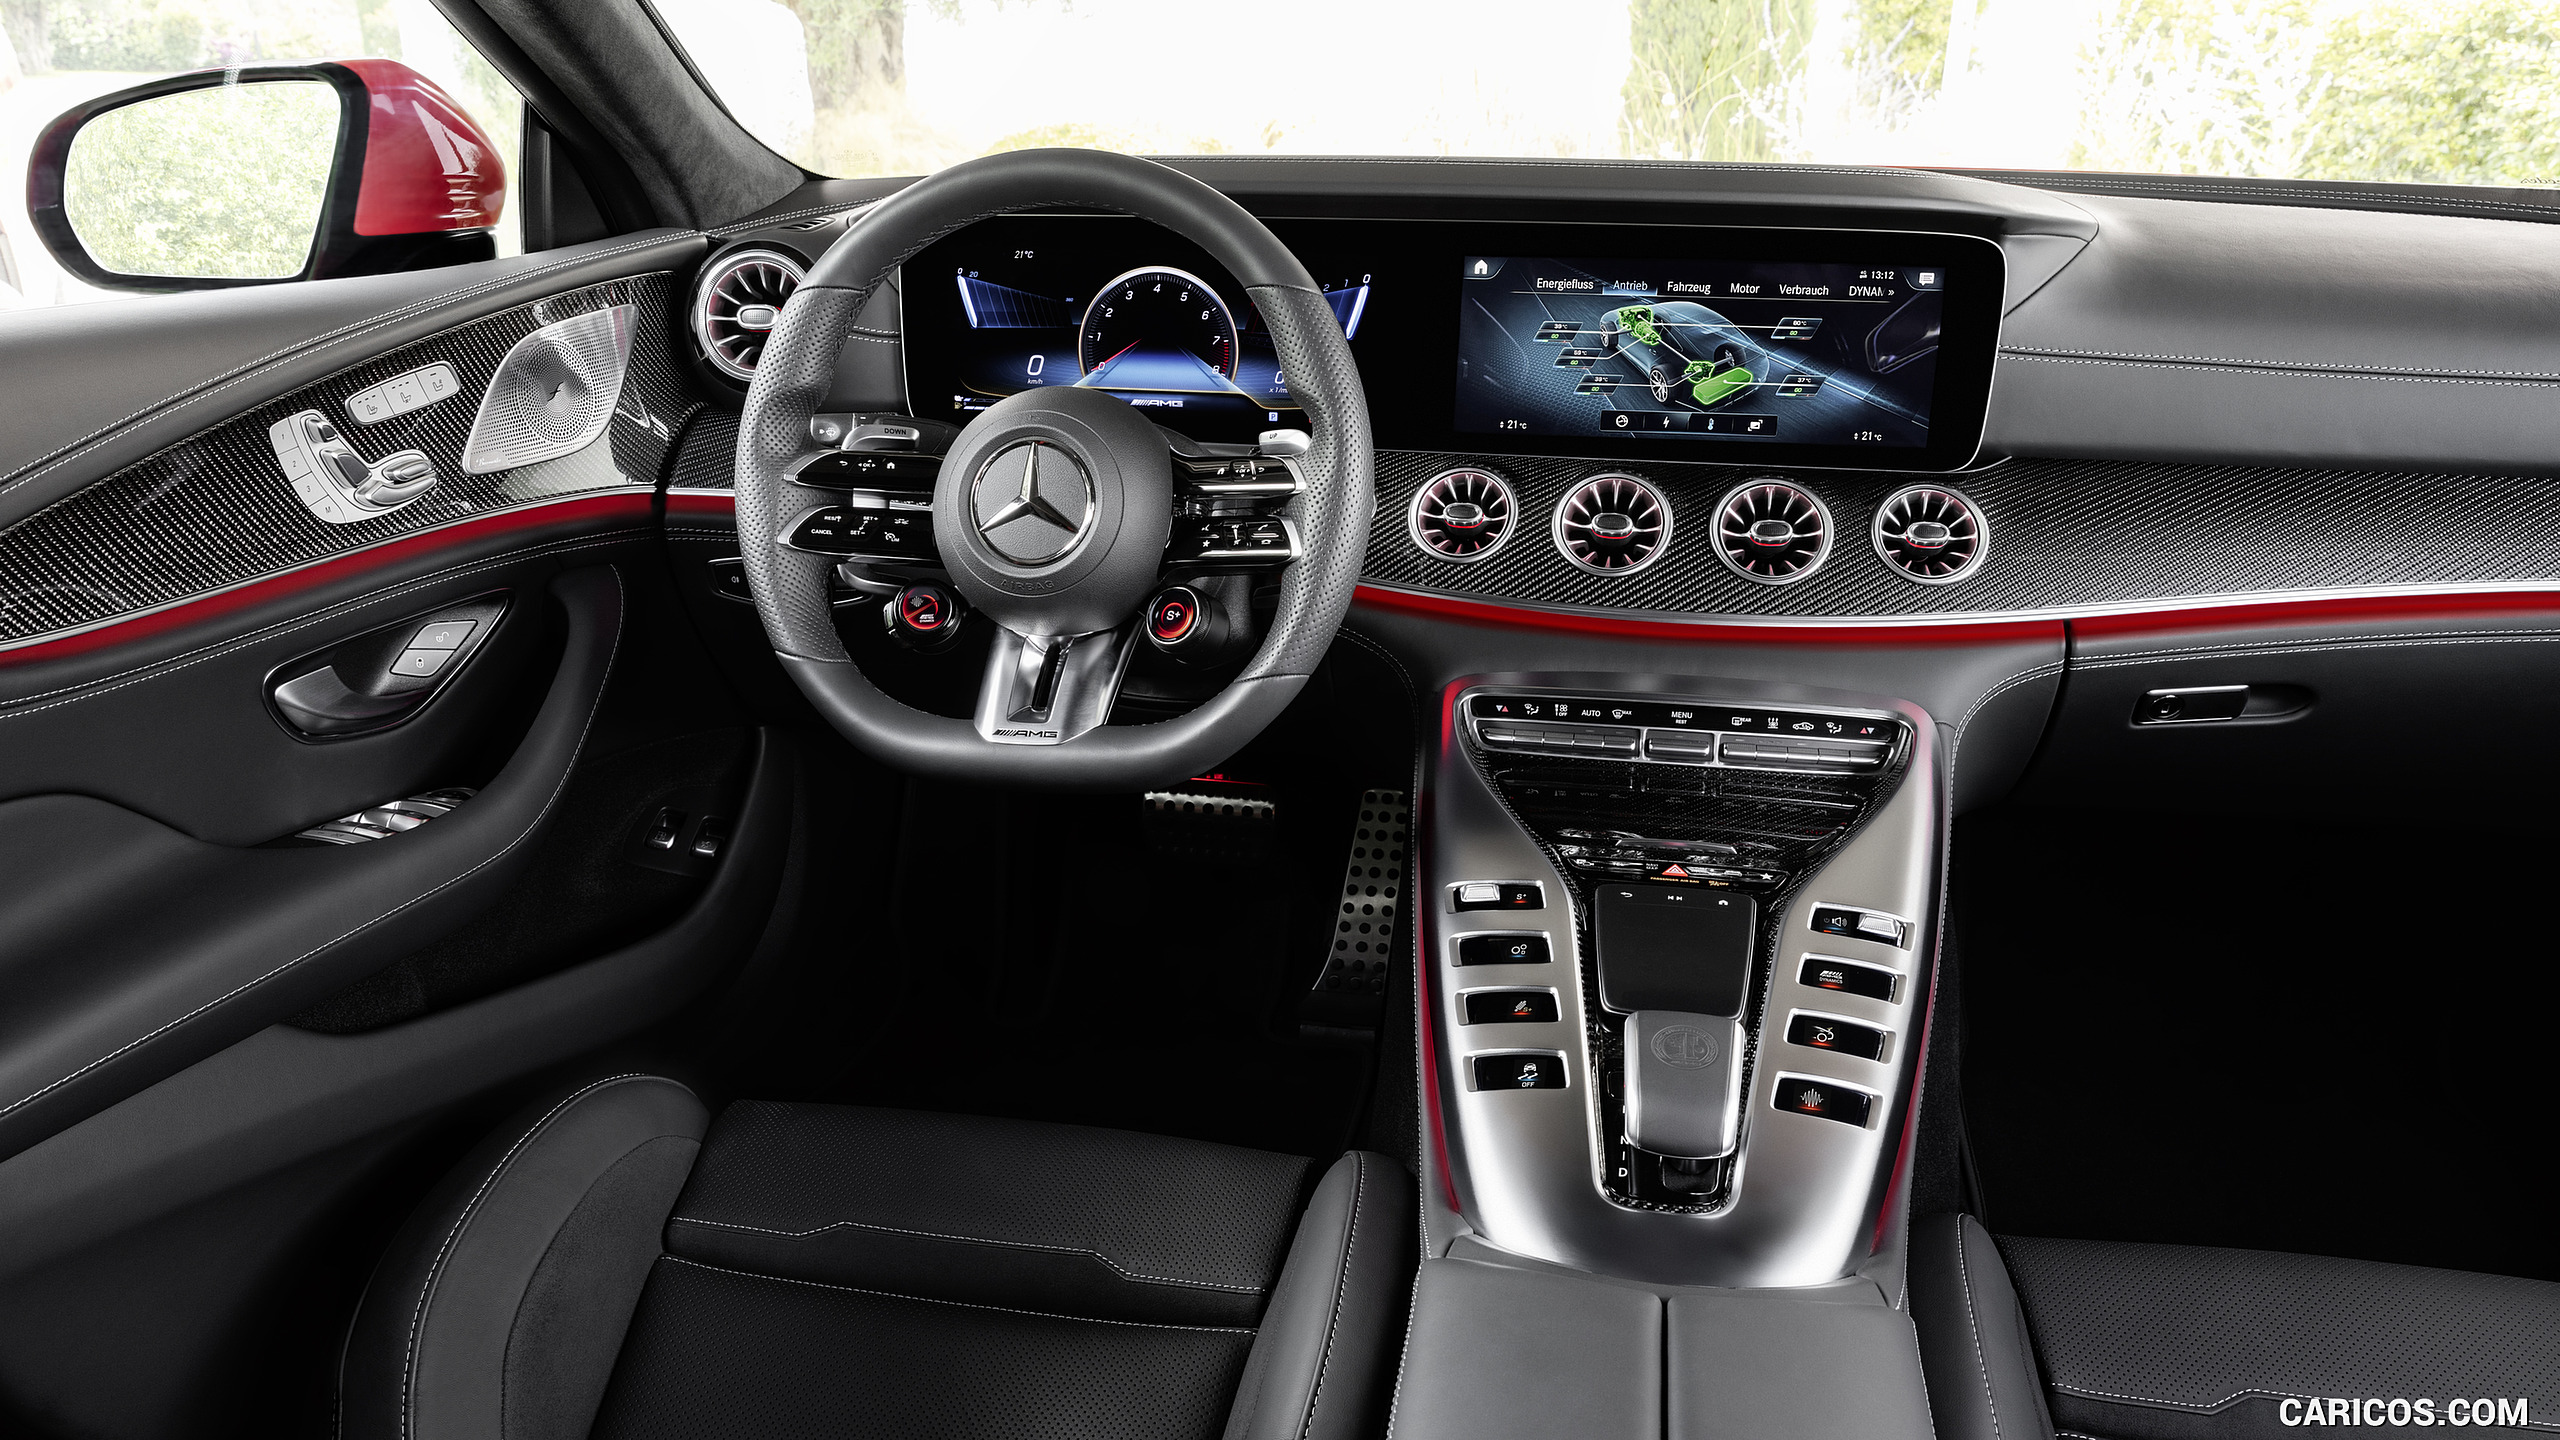 2022 Mercedes-AMG GT 63 S E Performance 4MATIC+ - Interior, Cockpit, #42 of 88